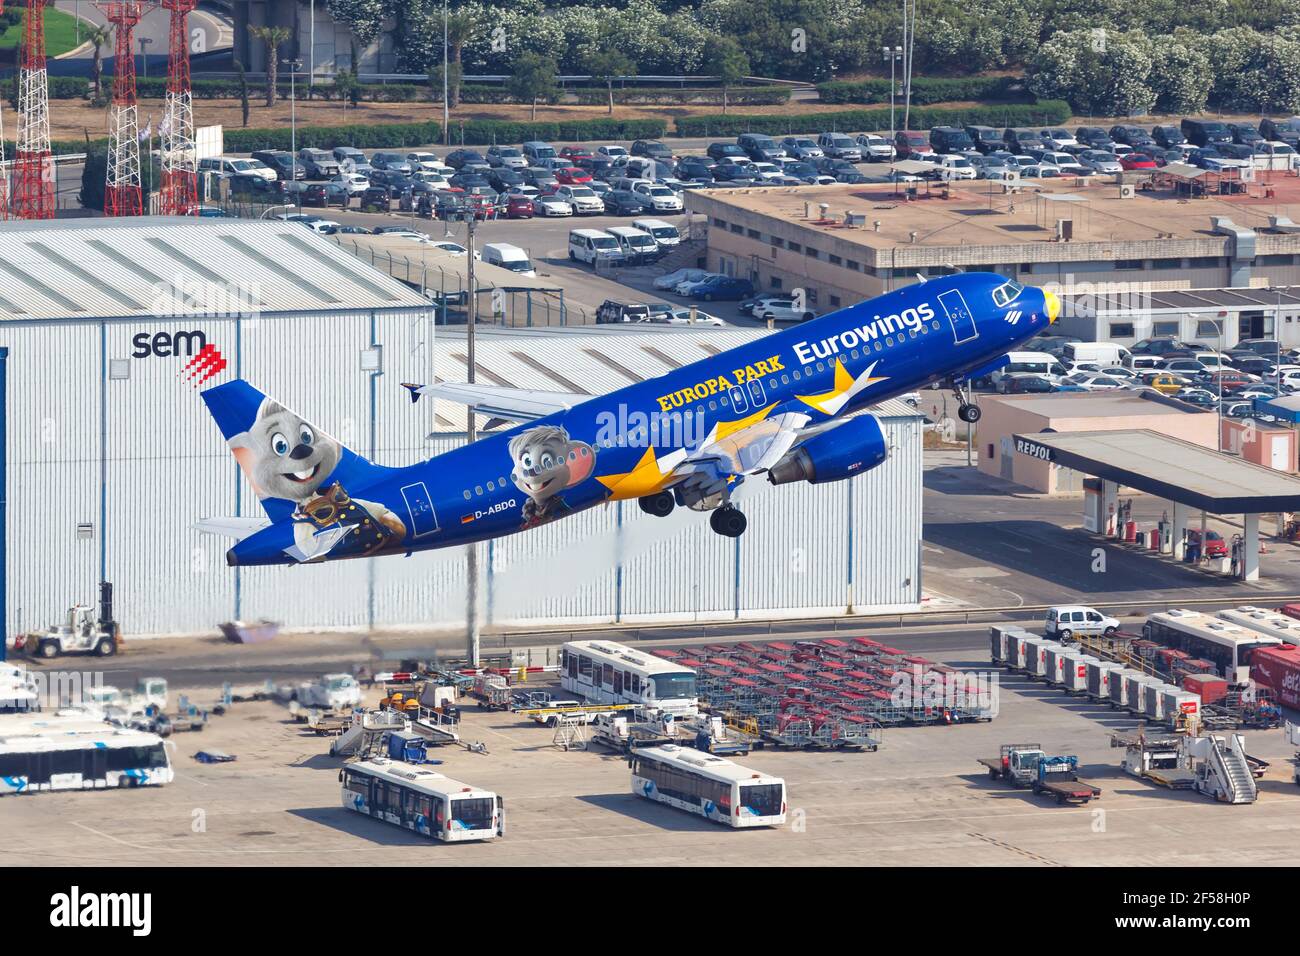 Palma de Mallorca, Spain - July 21, 2018: Aerial photo of a Eurowings Airbus A320 airplane in the Europa Park livery taking off at Palma de Mallorca a Stock Photo